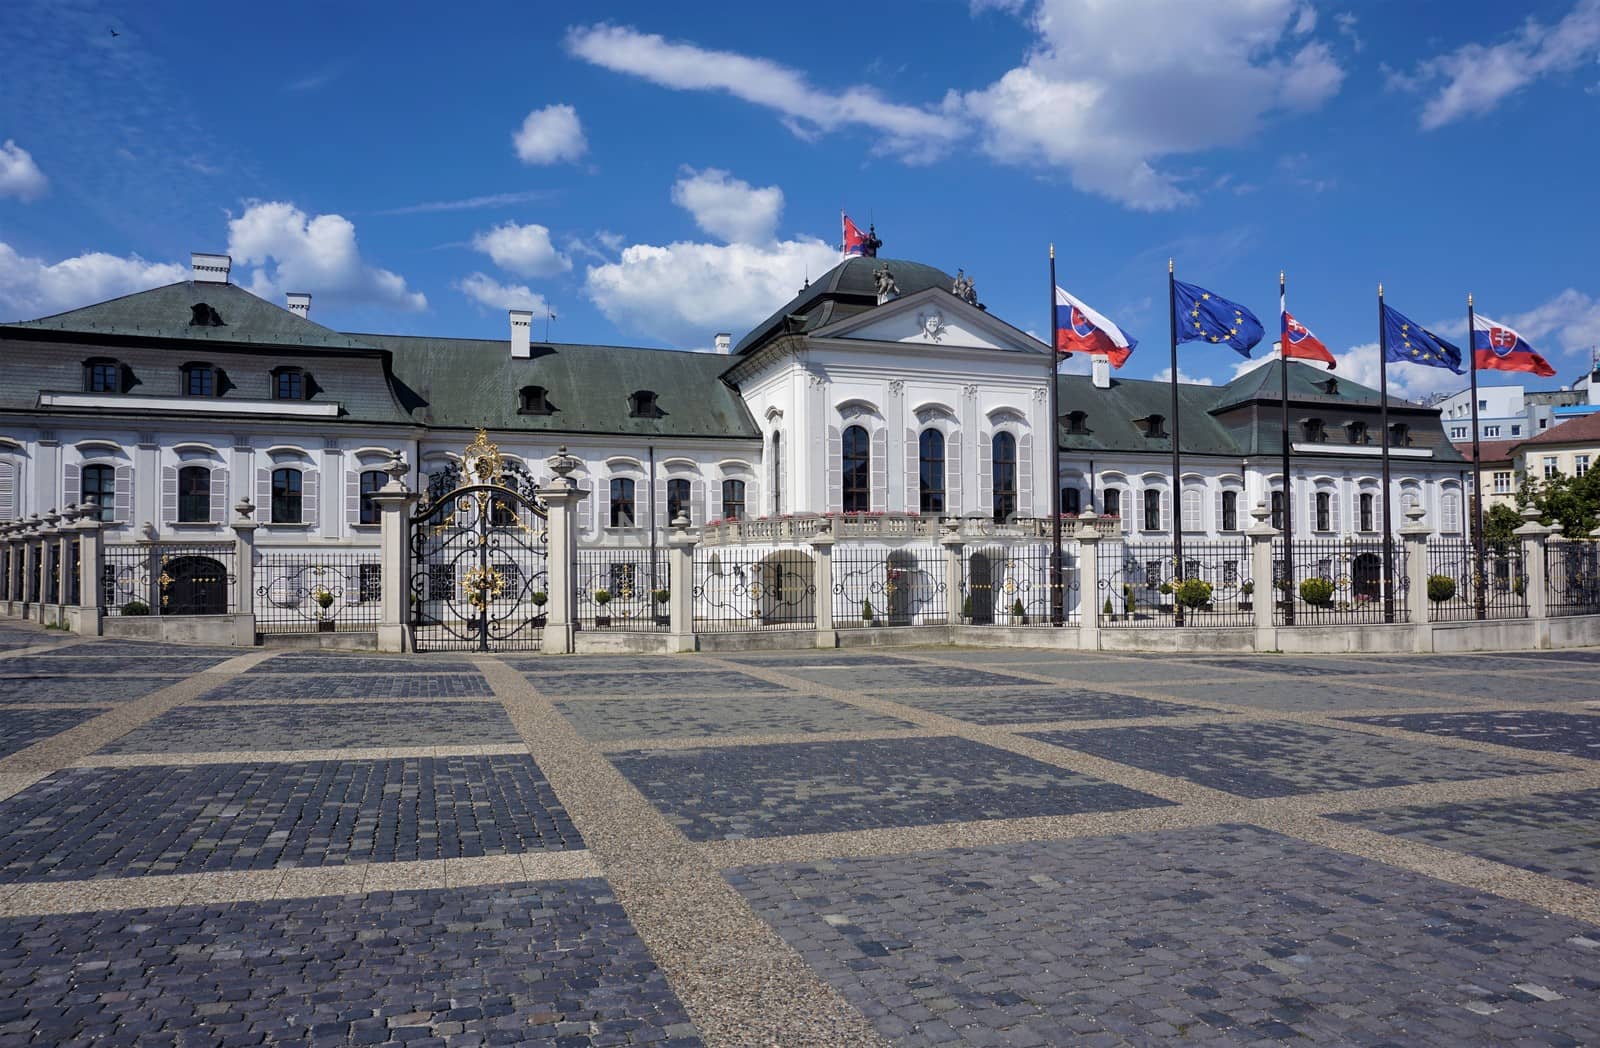 Photo of the presidential palace in Bratislava by pisces2386